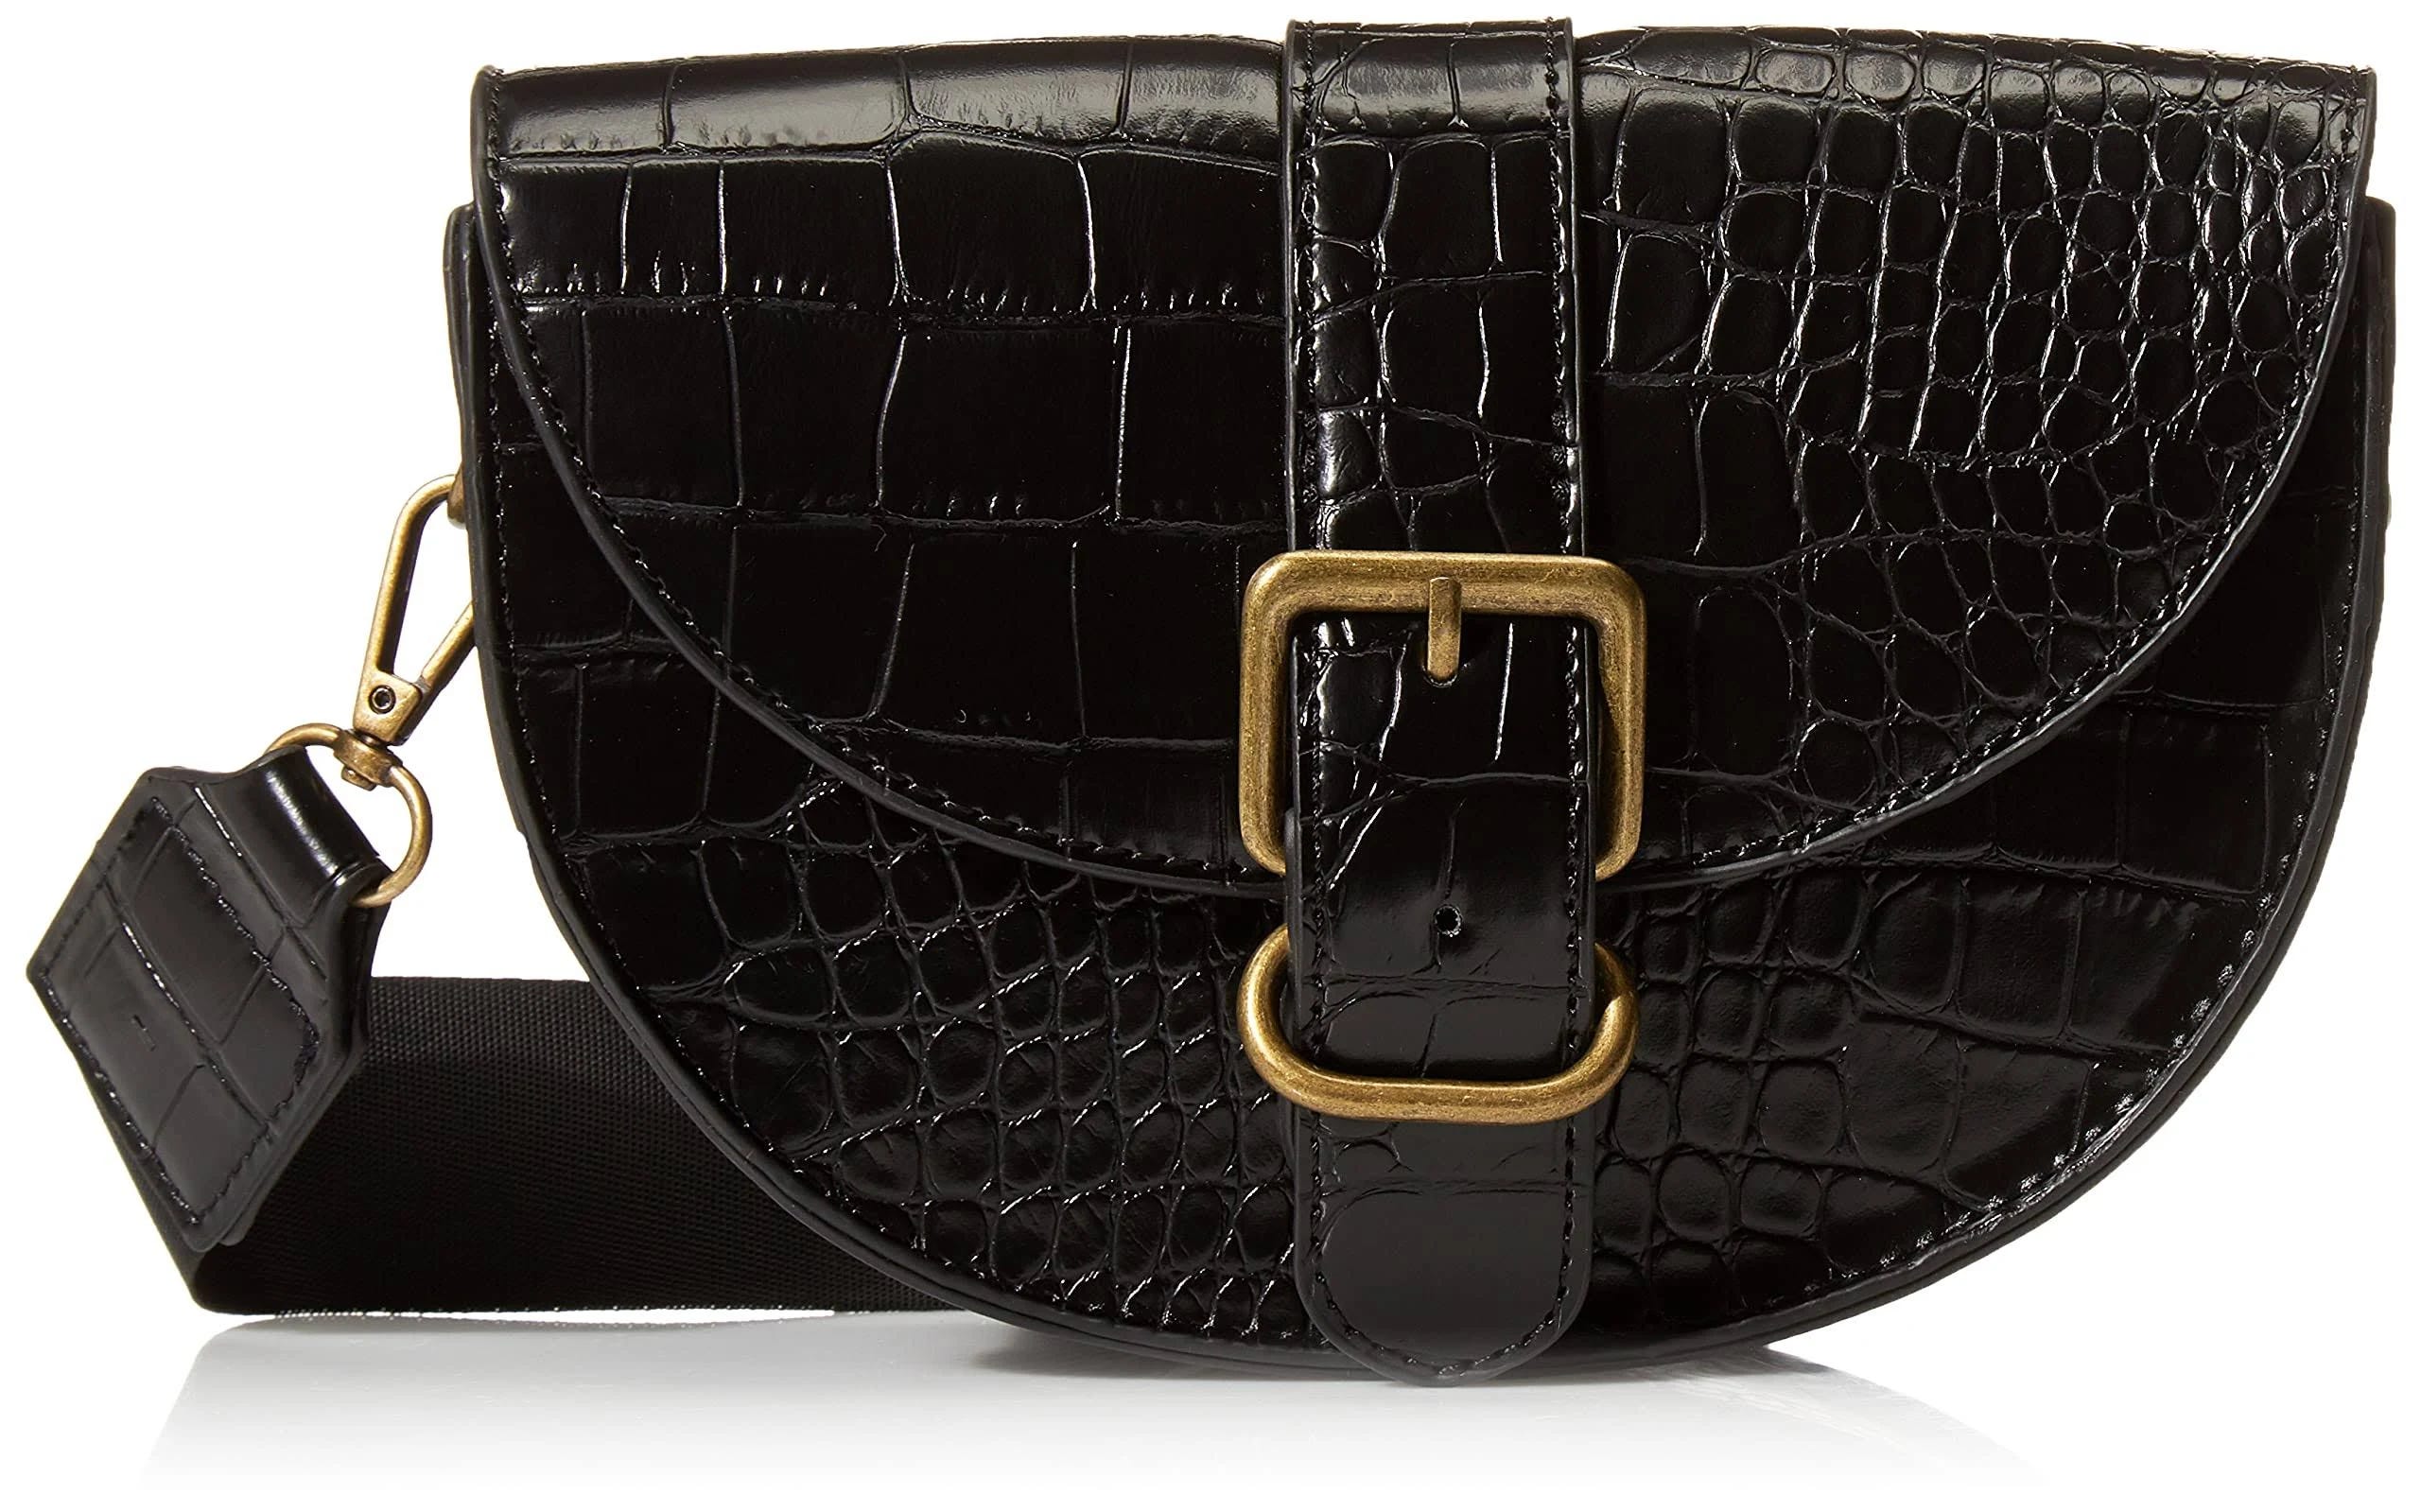 Black Mini Crossbody Bag by The Drop with Adjustable Strap | Image